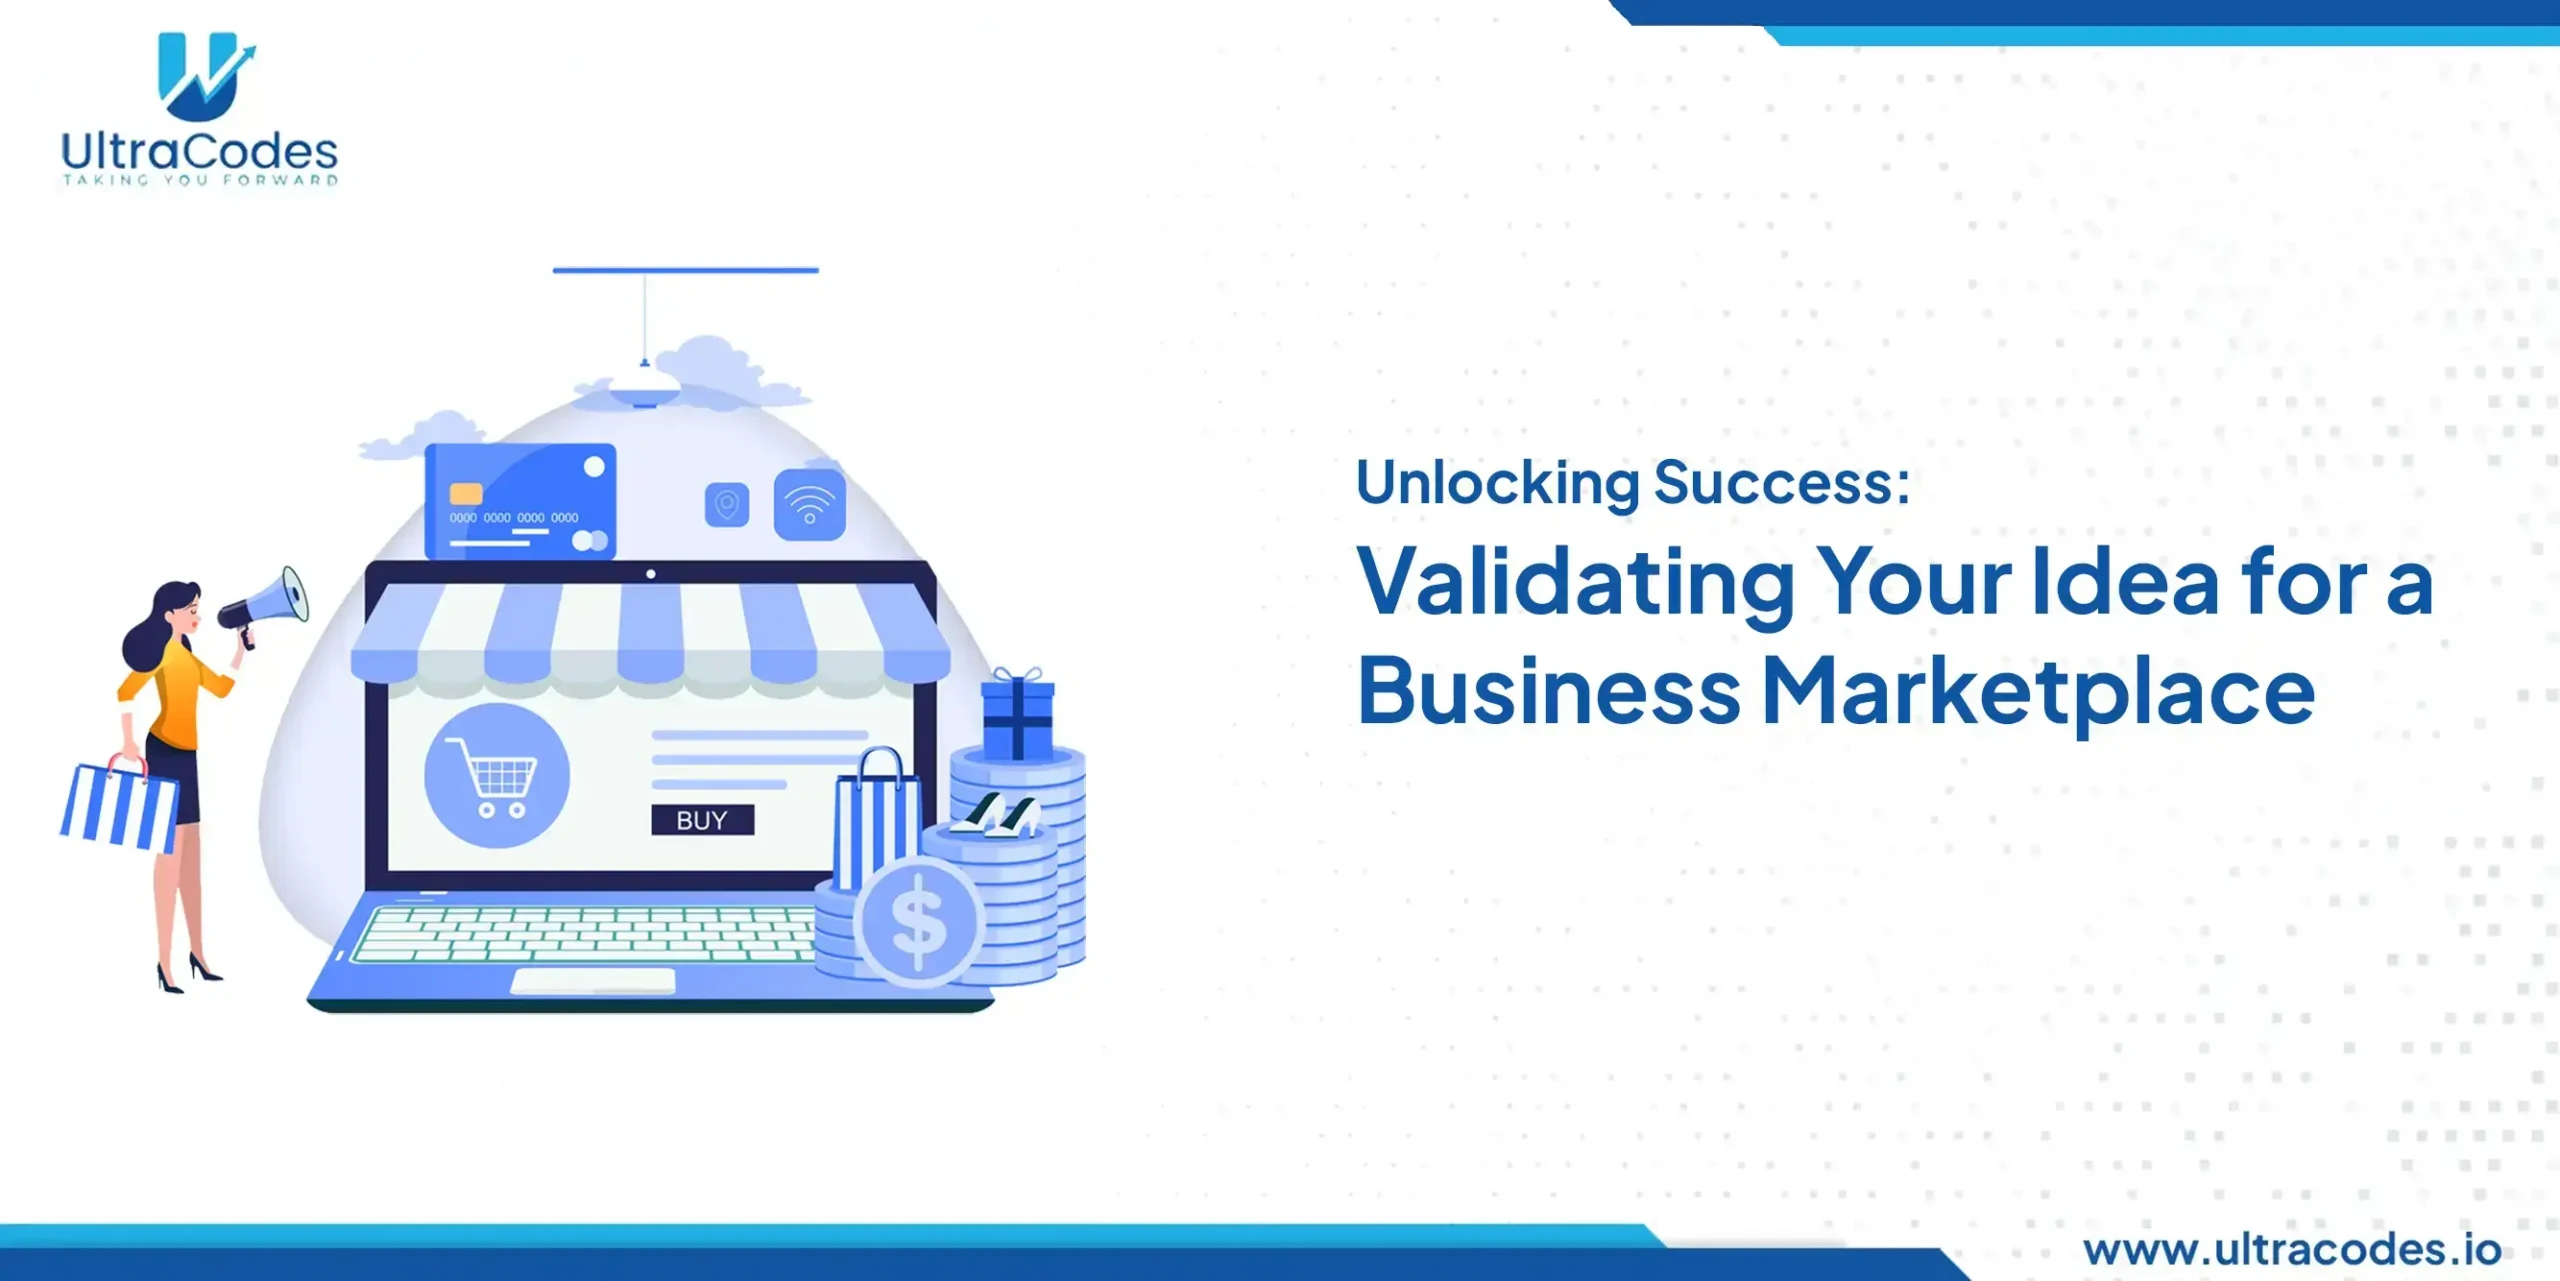 How to Successfully Validate Your Idea for a Business Marketplace